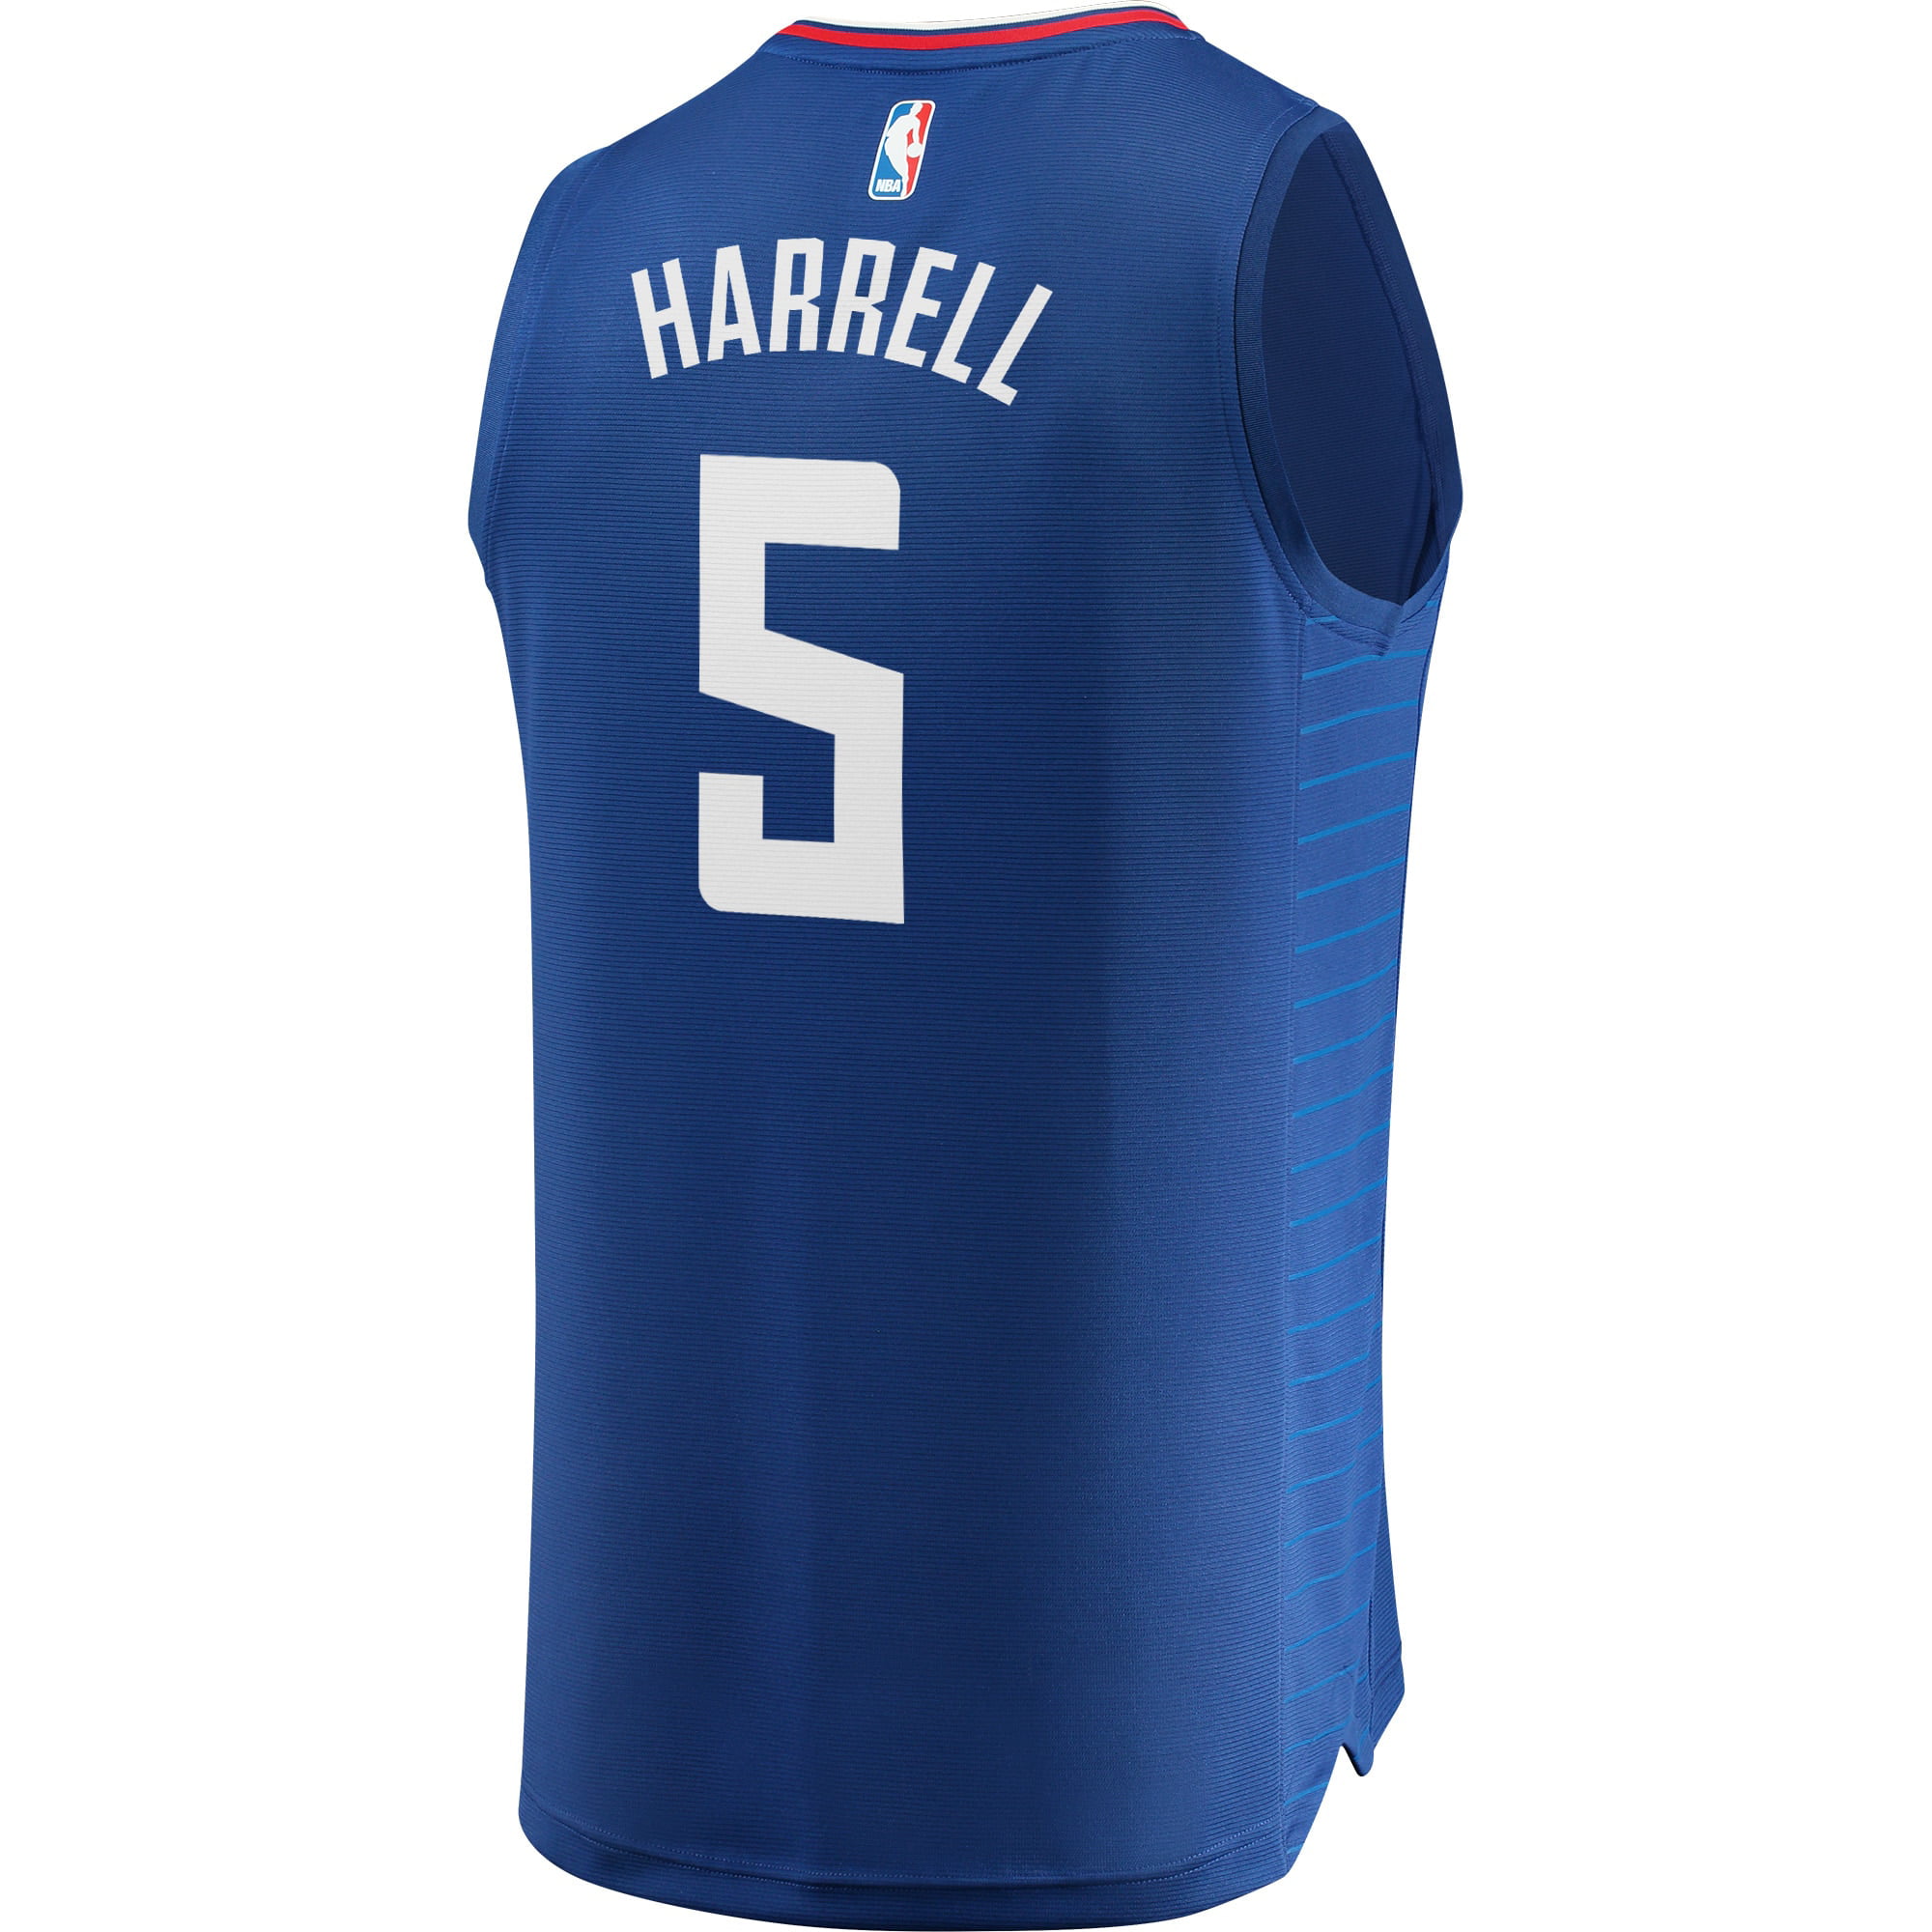 montrezl harrell clippers jersey